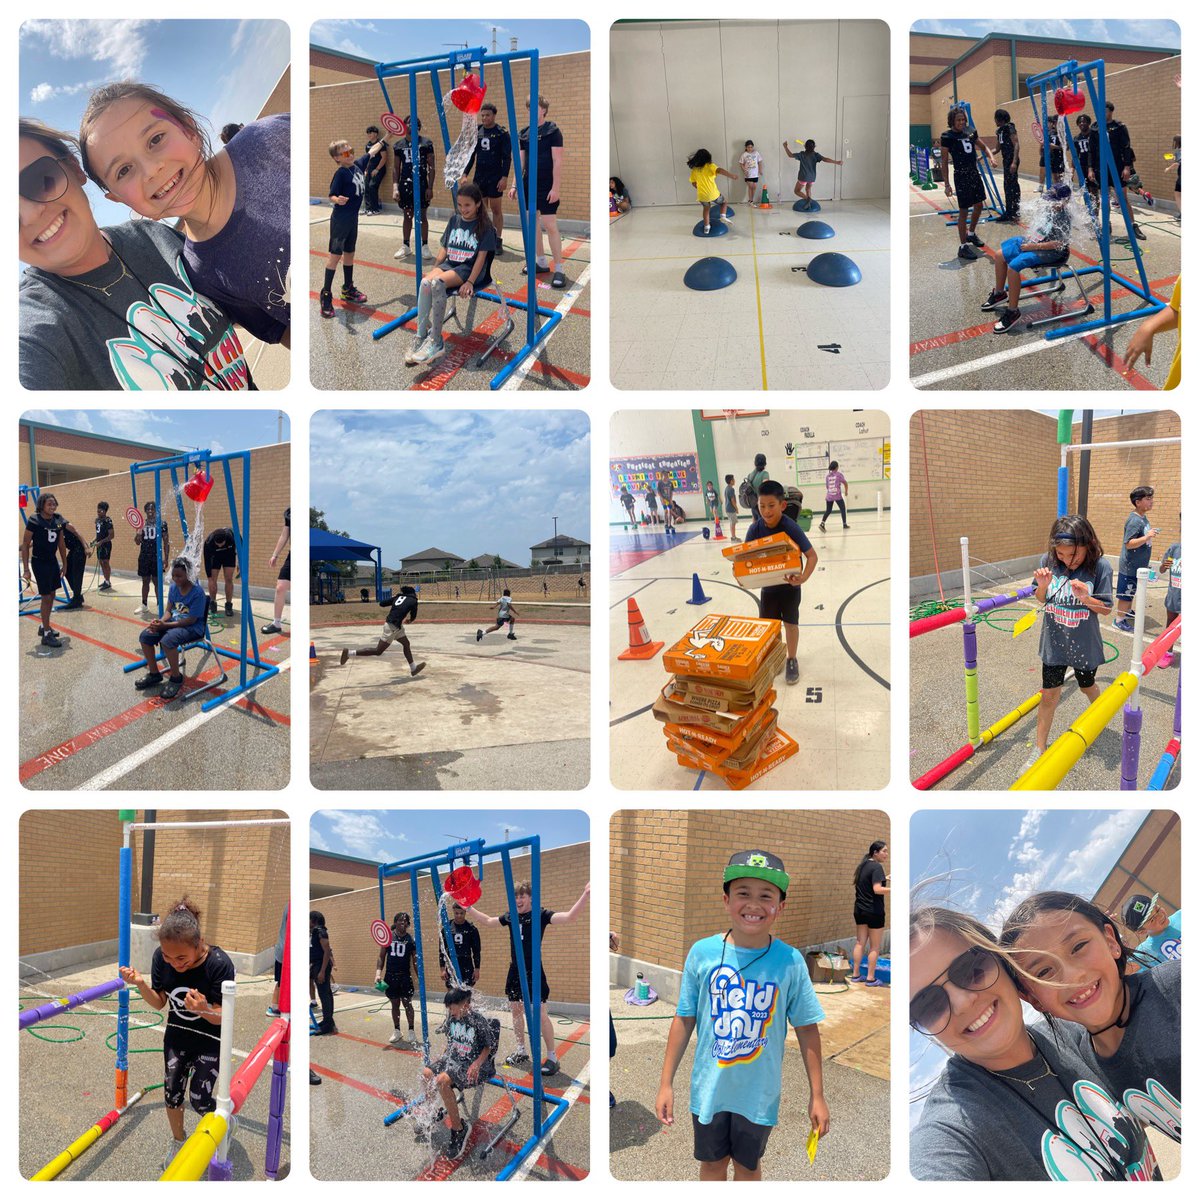 Field day was SO much fun! With 58 stations to get through, these kiddos were busy!! It was so amazing to just enjoy the day with them and watch them be kids! Thank you to our amazing coaches for putting it all together! @NISDCole #thecoleway #coleexplorers #fieldday